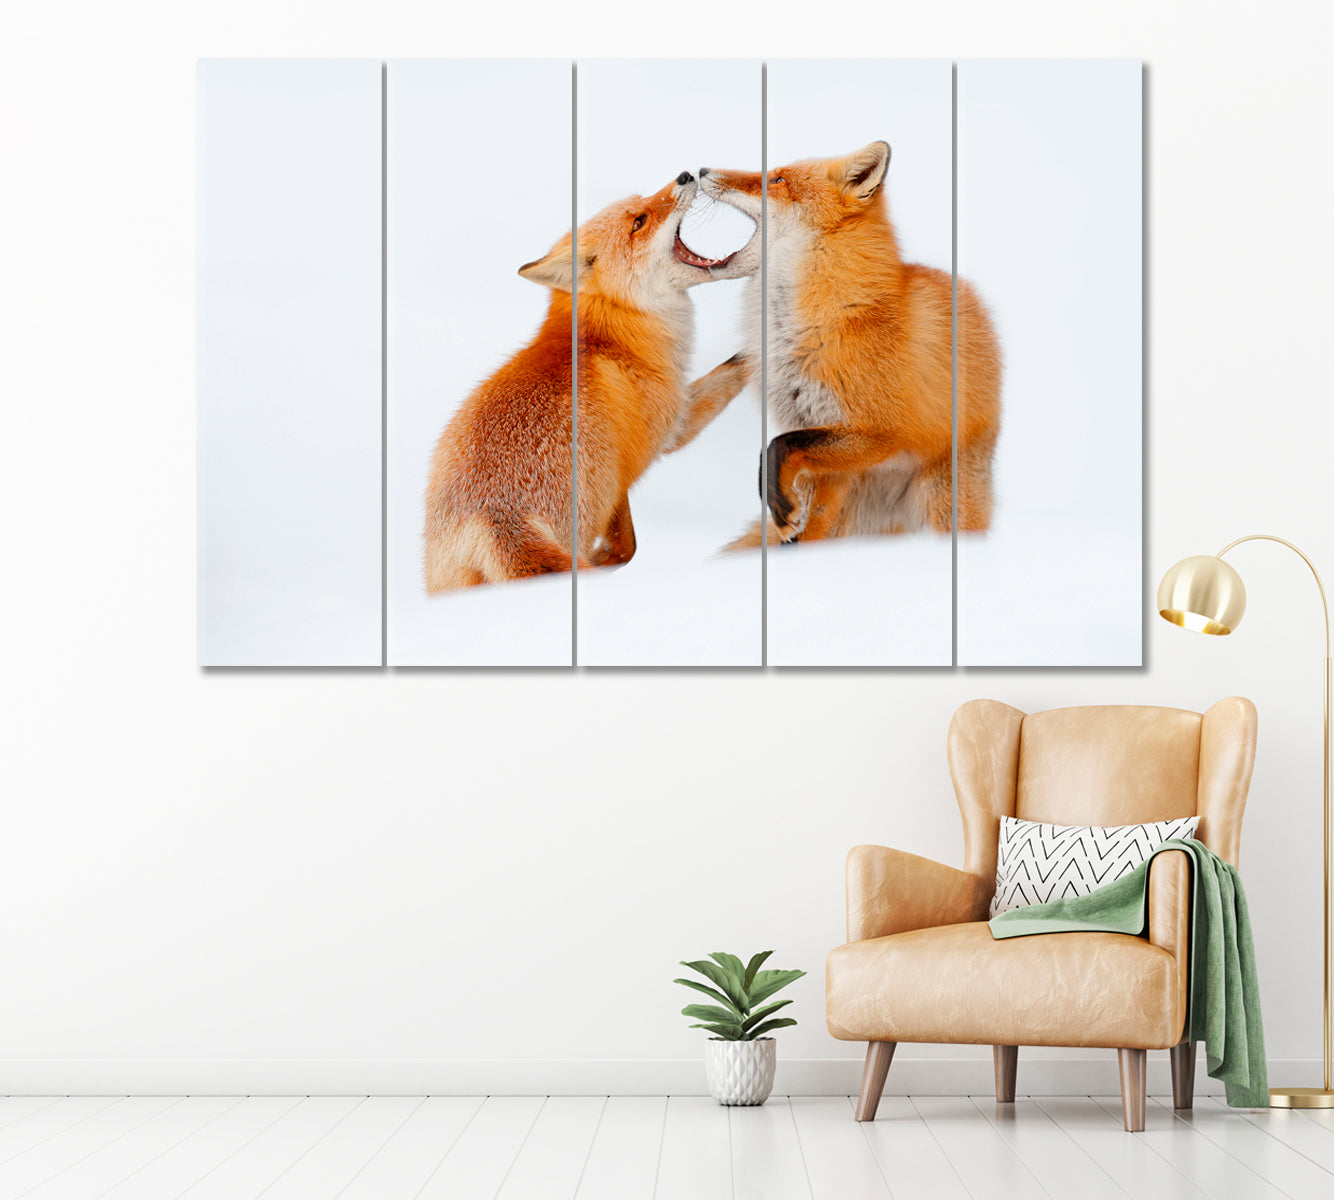 Red Foxes Playing in Snow Hokkaido Japan Canvas Print ArtLexy 5 Panels 36"x24" inches 